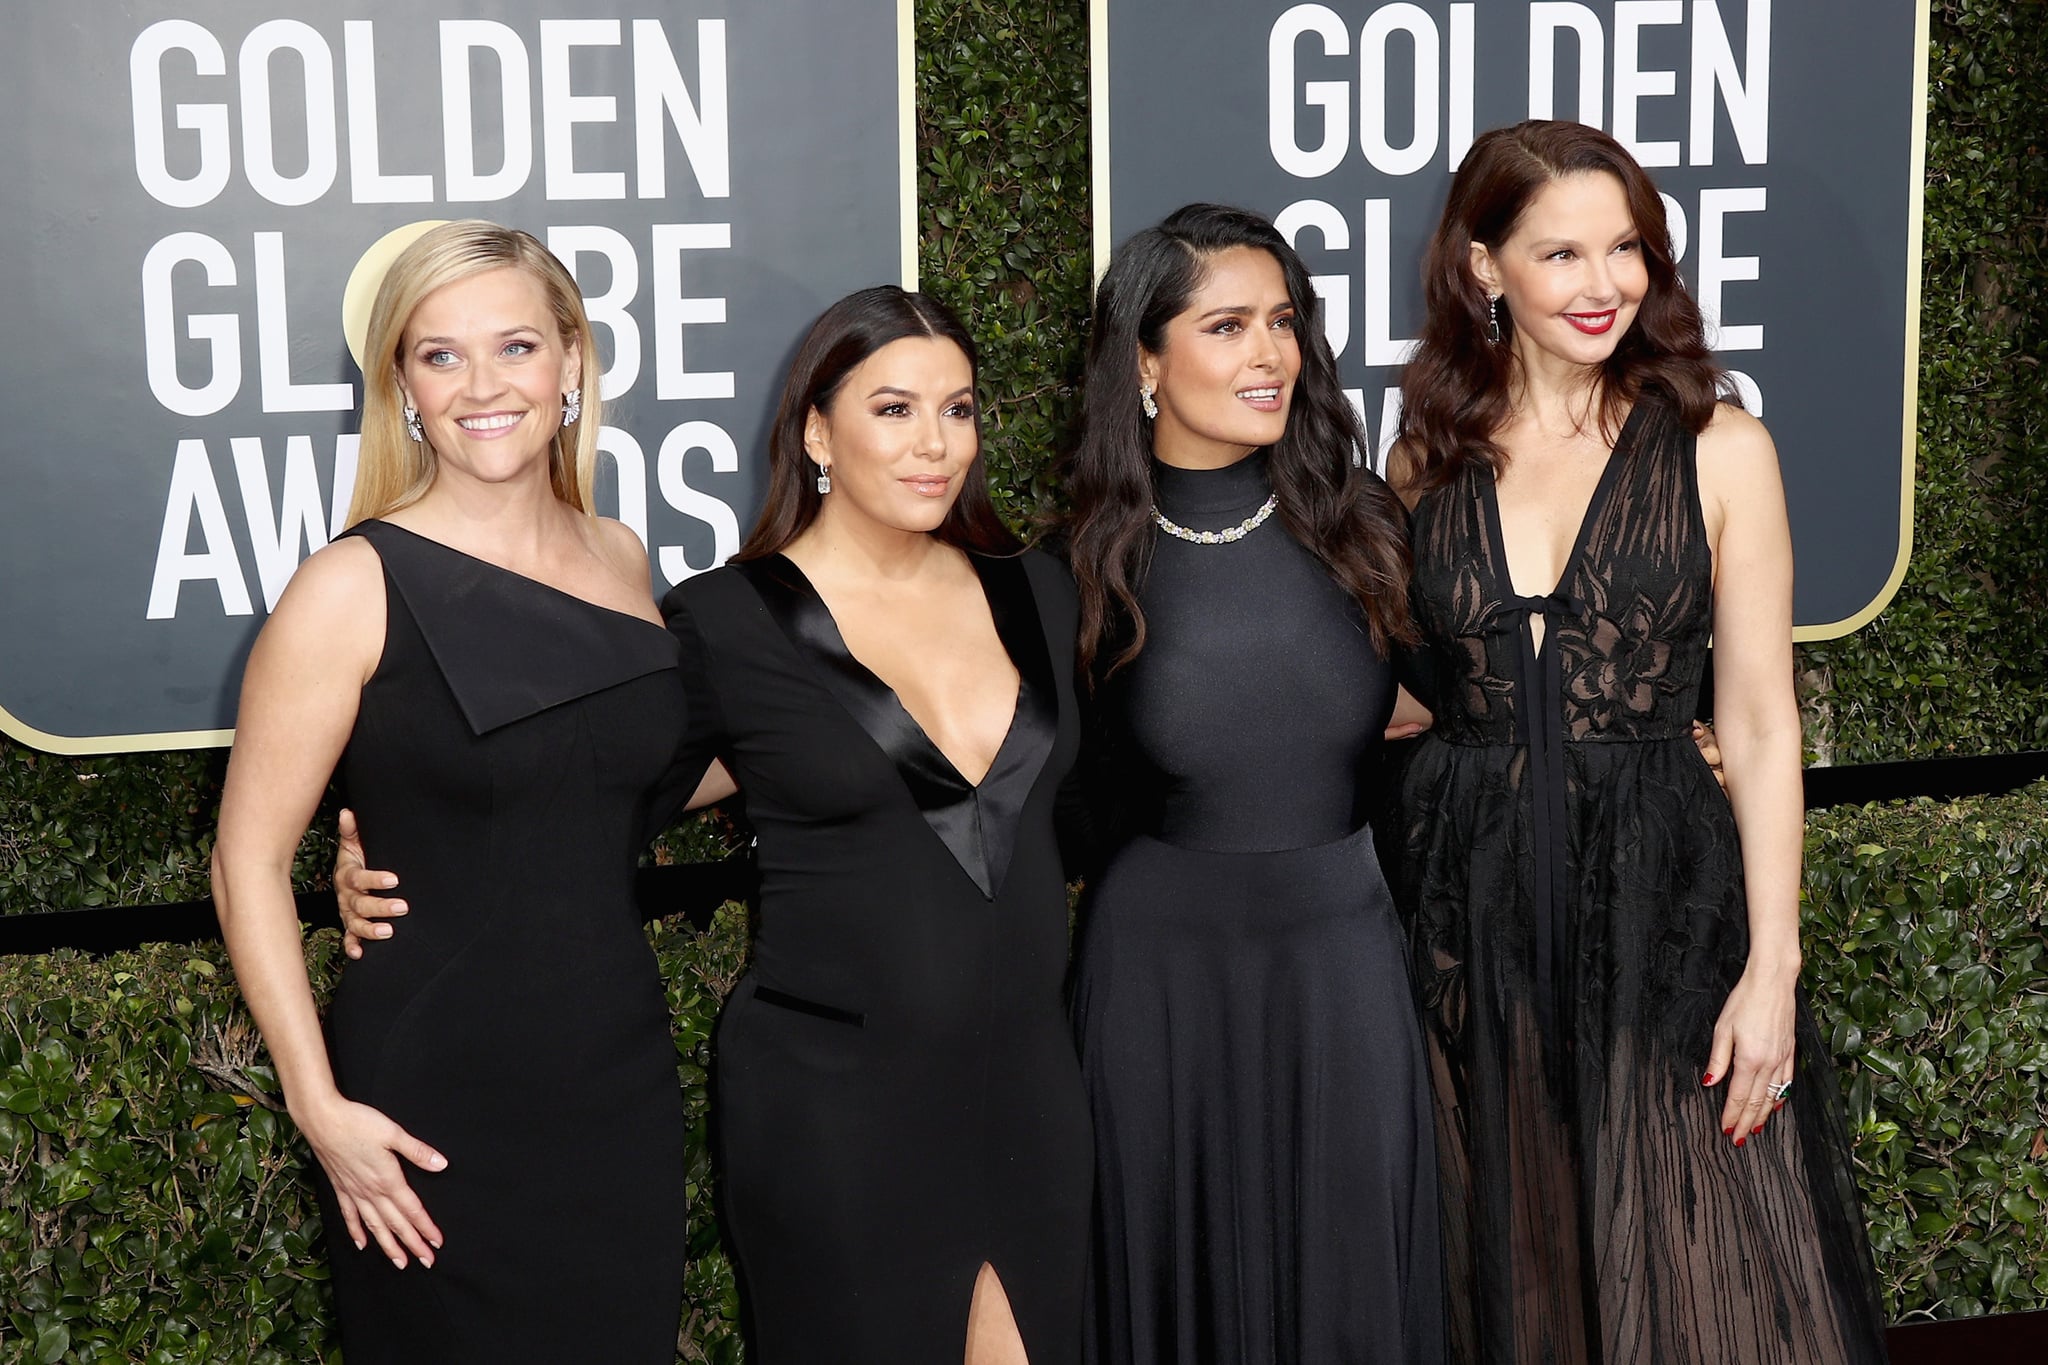 BEVERLY HILLS, CA - JANUARY 07:  Reese Witherspoon, Eva Longoria, Salma Hayek and Ashley Judd attend The 75th Annual Golden Globe Awards at The Beverly Hilton Hotel on January 7, 2018 in Beverly Hills, California.  (Photo by Frederick M. Brown/Getty Images)